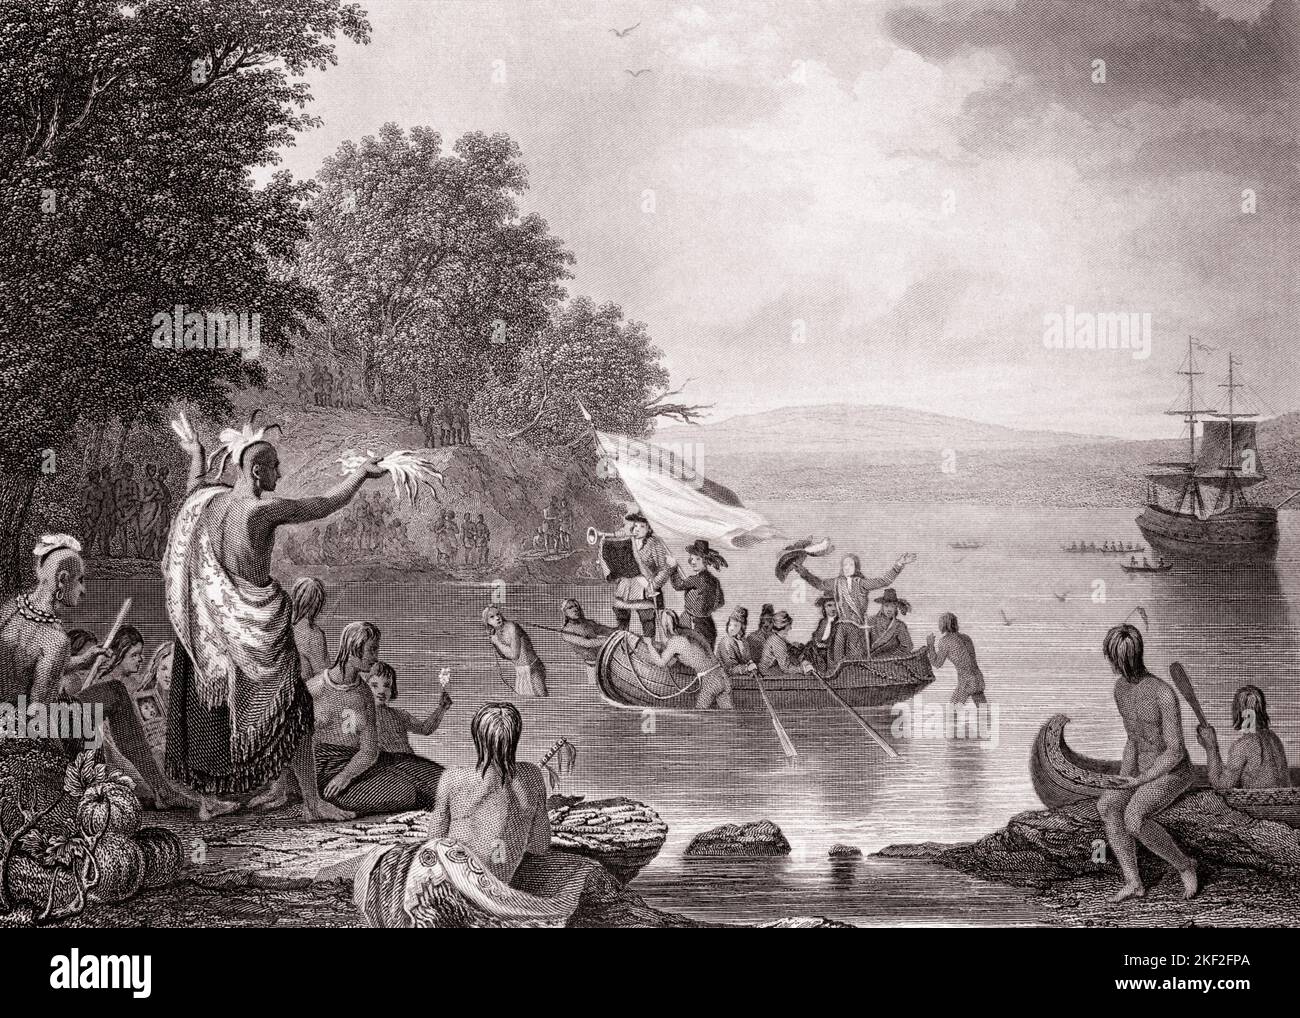 1600s 1609 LANDING OF HENRY HUDSON OF THE DUTCH EAST INDIA COMPANY IN WHAT WILL BECOME THE HUDSON RIVER IN NEW YORK STATE USA - q53099 CPC001 HARS COMMANDER OR TRADE 1600s HENRY HUDSON NATIVE AMERICANS 1609 BLACK AND WHITE HENRY INDIGENOUS OLD FASHIONED SEPTEMBER Stock Photo